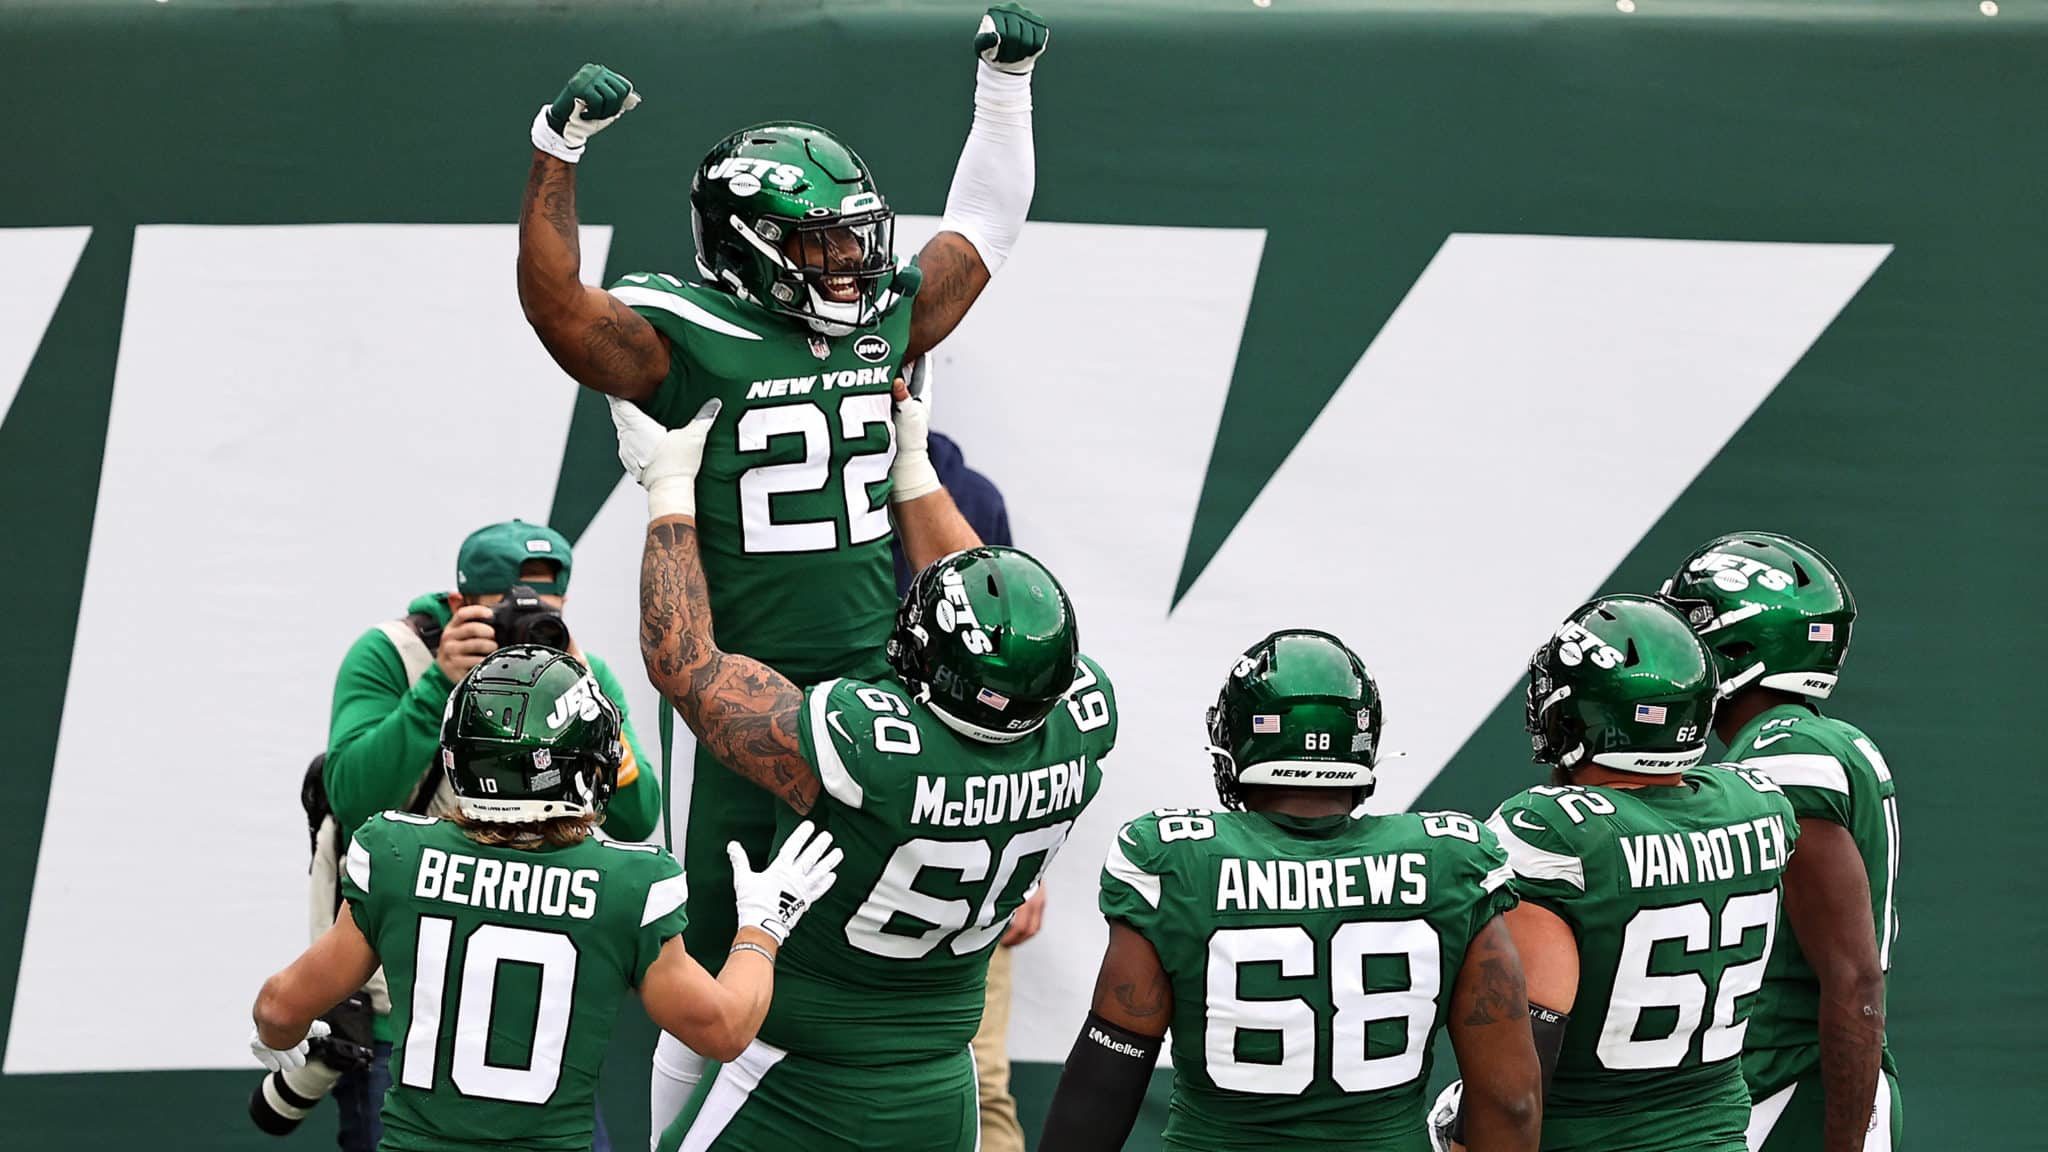 EAST RUTHERFORD, NEW JERSEY - OCTOBER 25: La'Mical Perine #22 of the New York Jets celebrates his touchdown with teammates in the second quarter against the Buffalo Bills at MetLife Stadium on October 25, 2020 in East Rutherford, New Jersey.